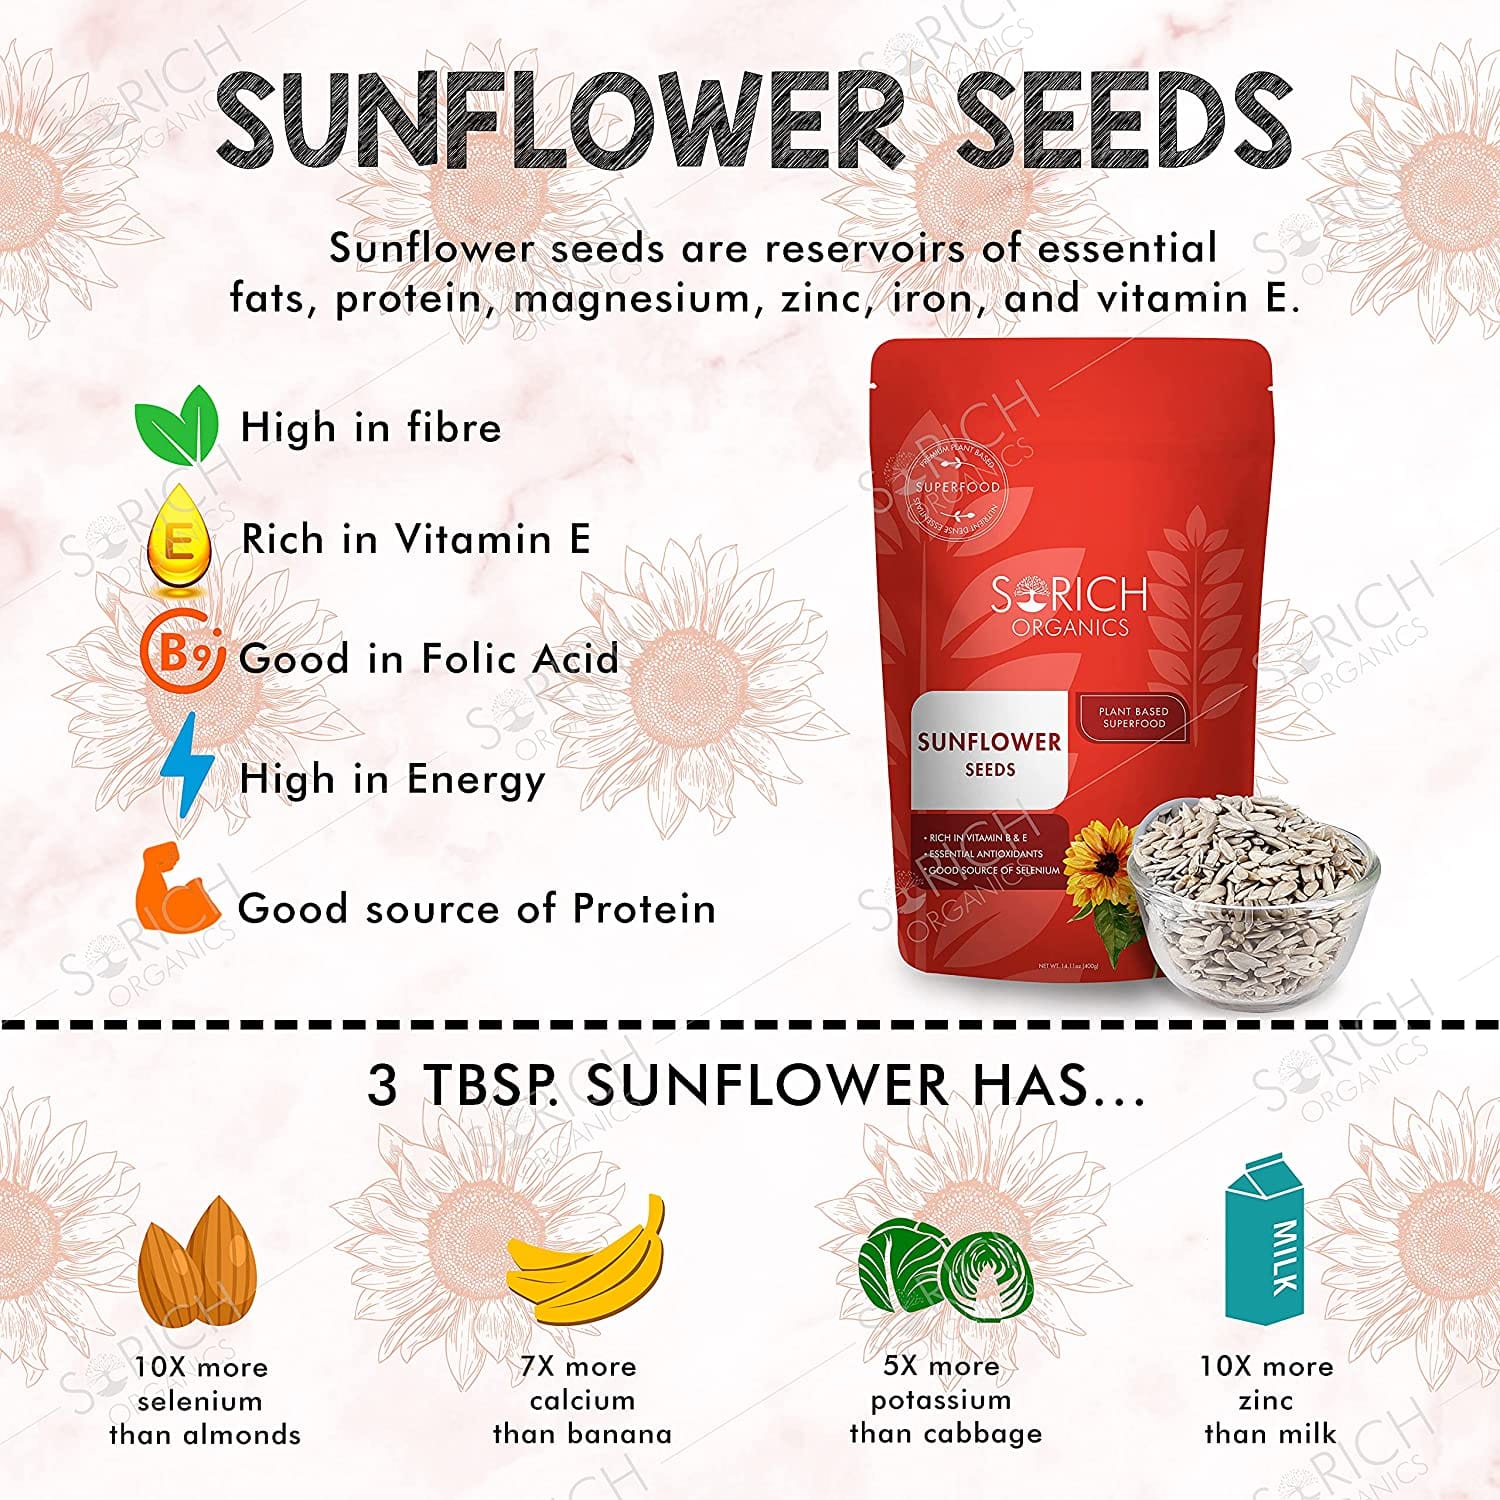 Raw Sunflower Seeds 400 gm Flax Seed 400 gm Combo Pack - 800 gm - Sorich